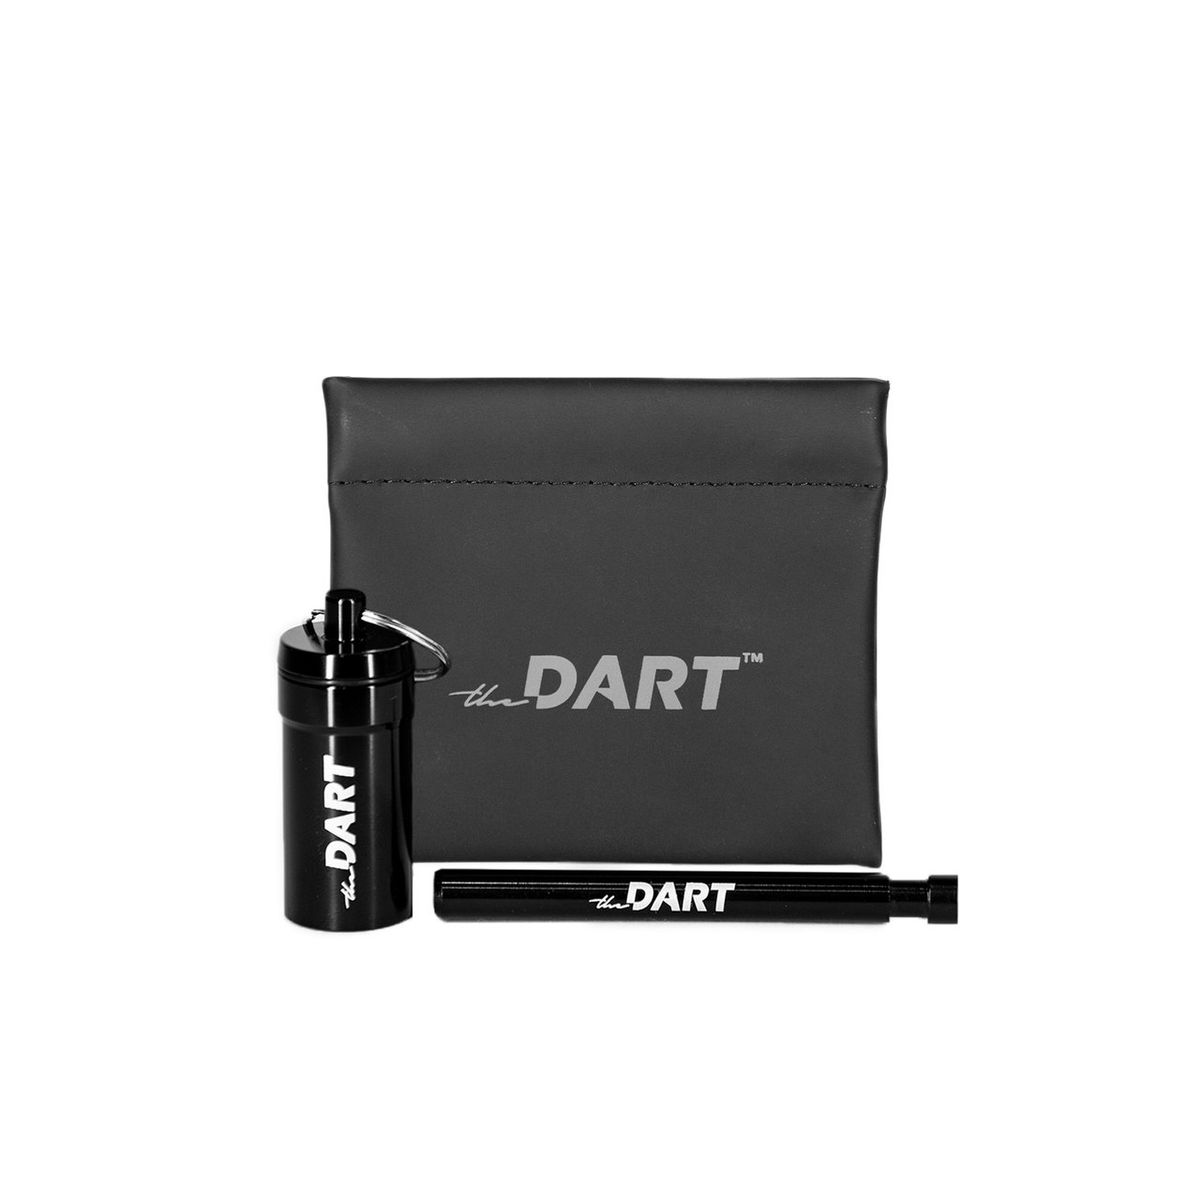 the Dart™ x Puff Provisions collaboration is as compact and discreet as it is stylish. Excellent for smoking any time you want a quick hit. Saves you time and money by helping to conserve your herb, removes the need to roll joints/blunts, and easy to clean with the built-in ash release mechanism.